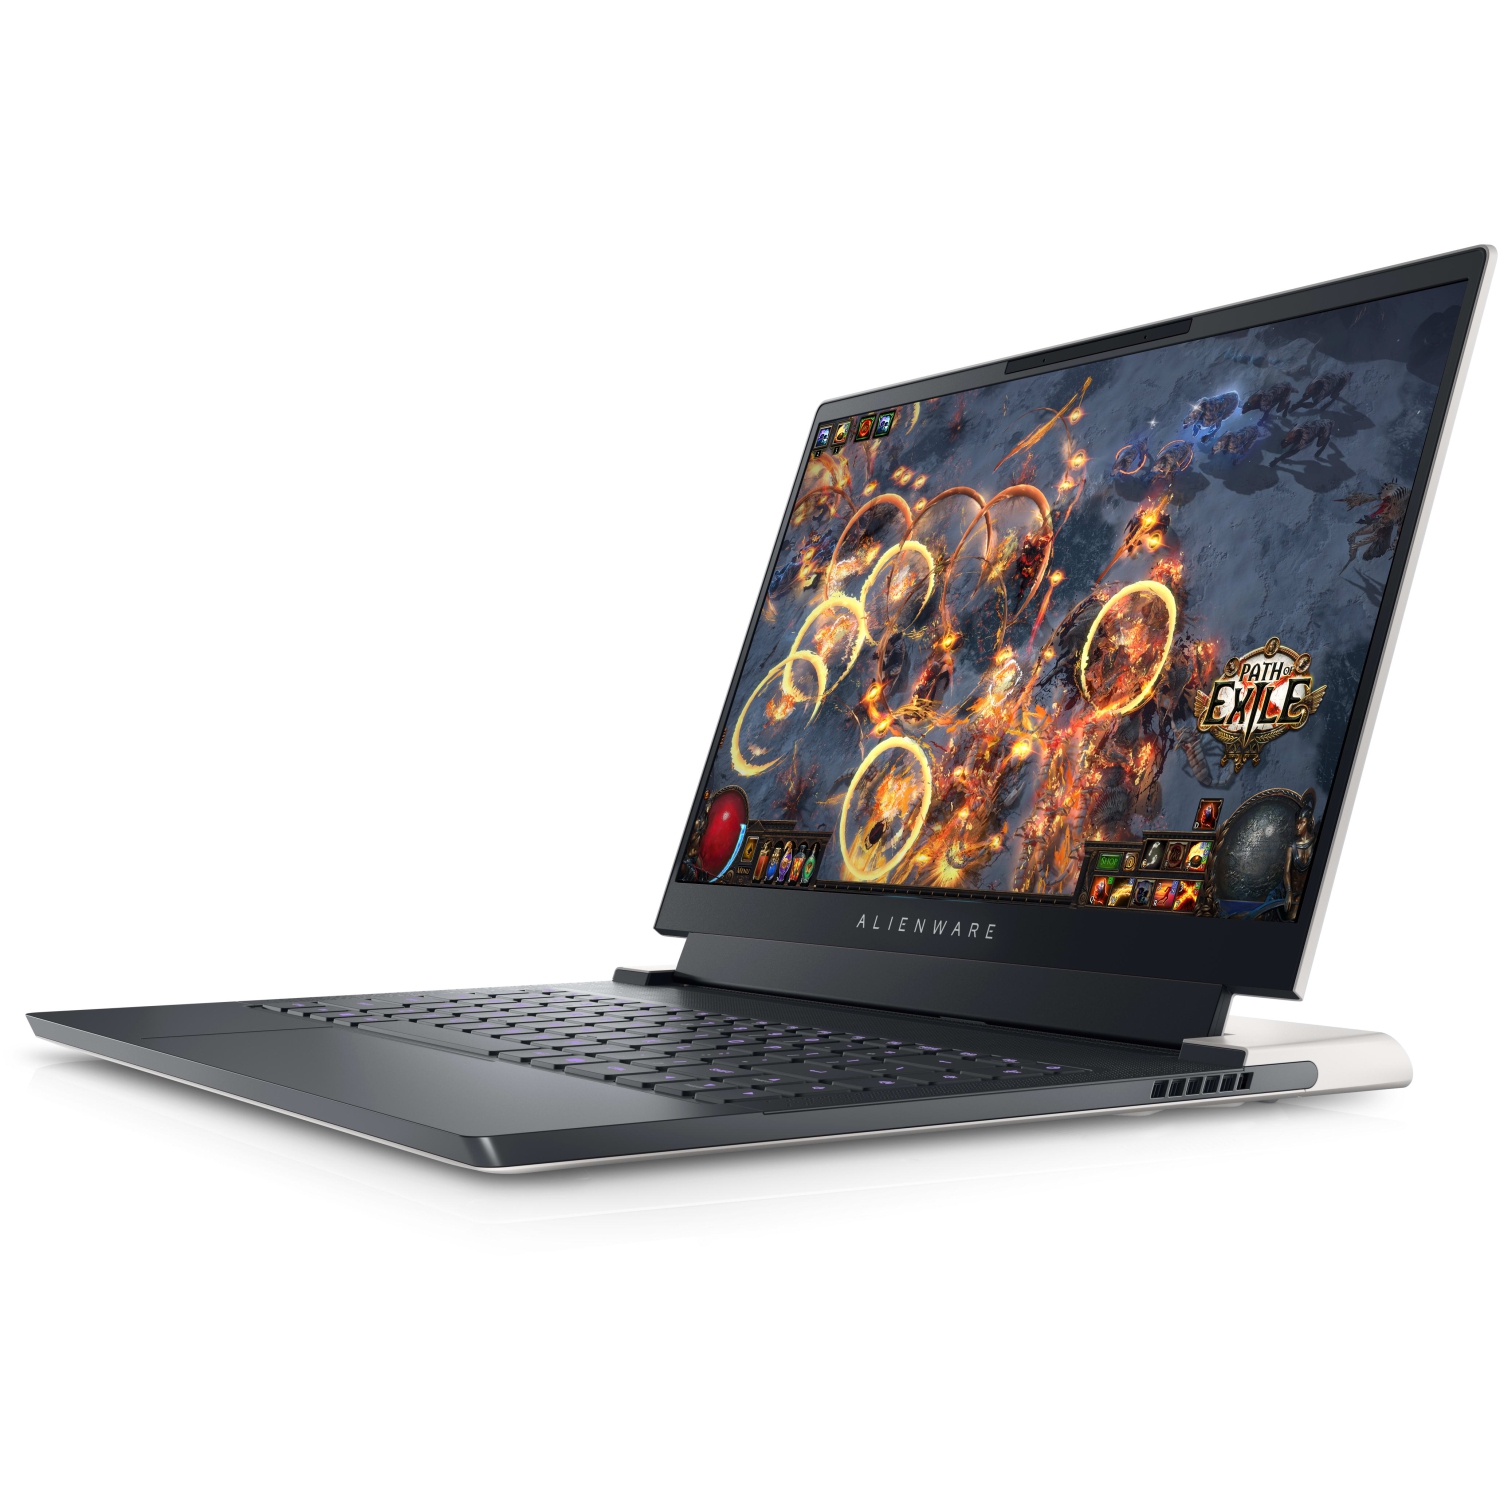 Refurbished (Excellent) – Dell Alienware X14 Gaming Laptop (2022) | 14" FHD | Core i7 - 2TB SSD - 16GB RAM - RTX 3060 | 14 Cores @ 4.7 GHz - 12th Gen CPU - 6GB GDDR6